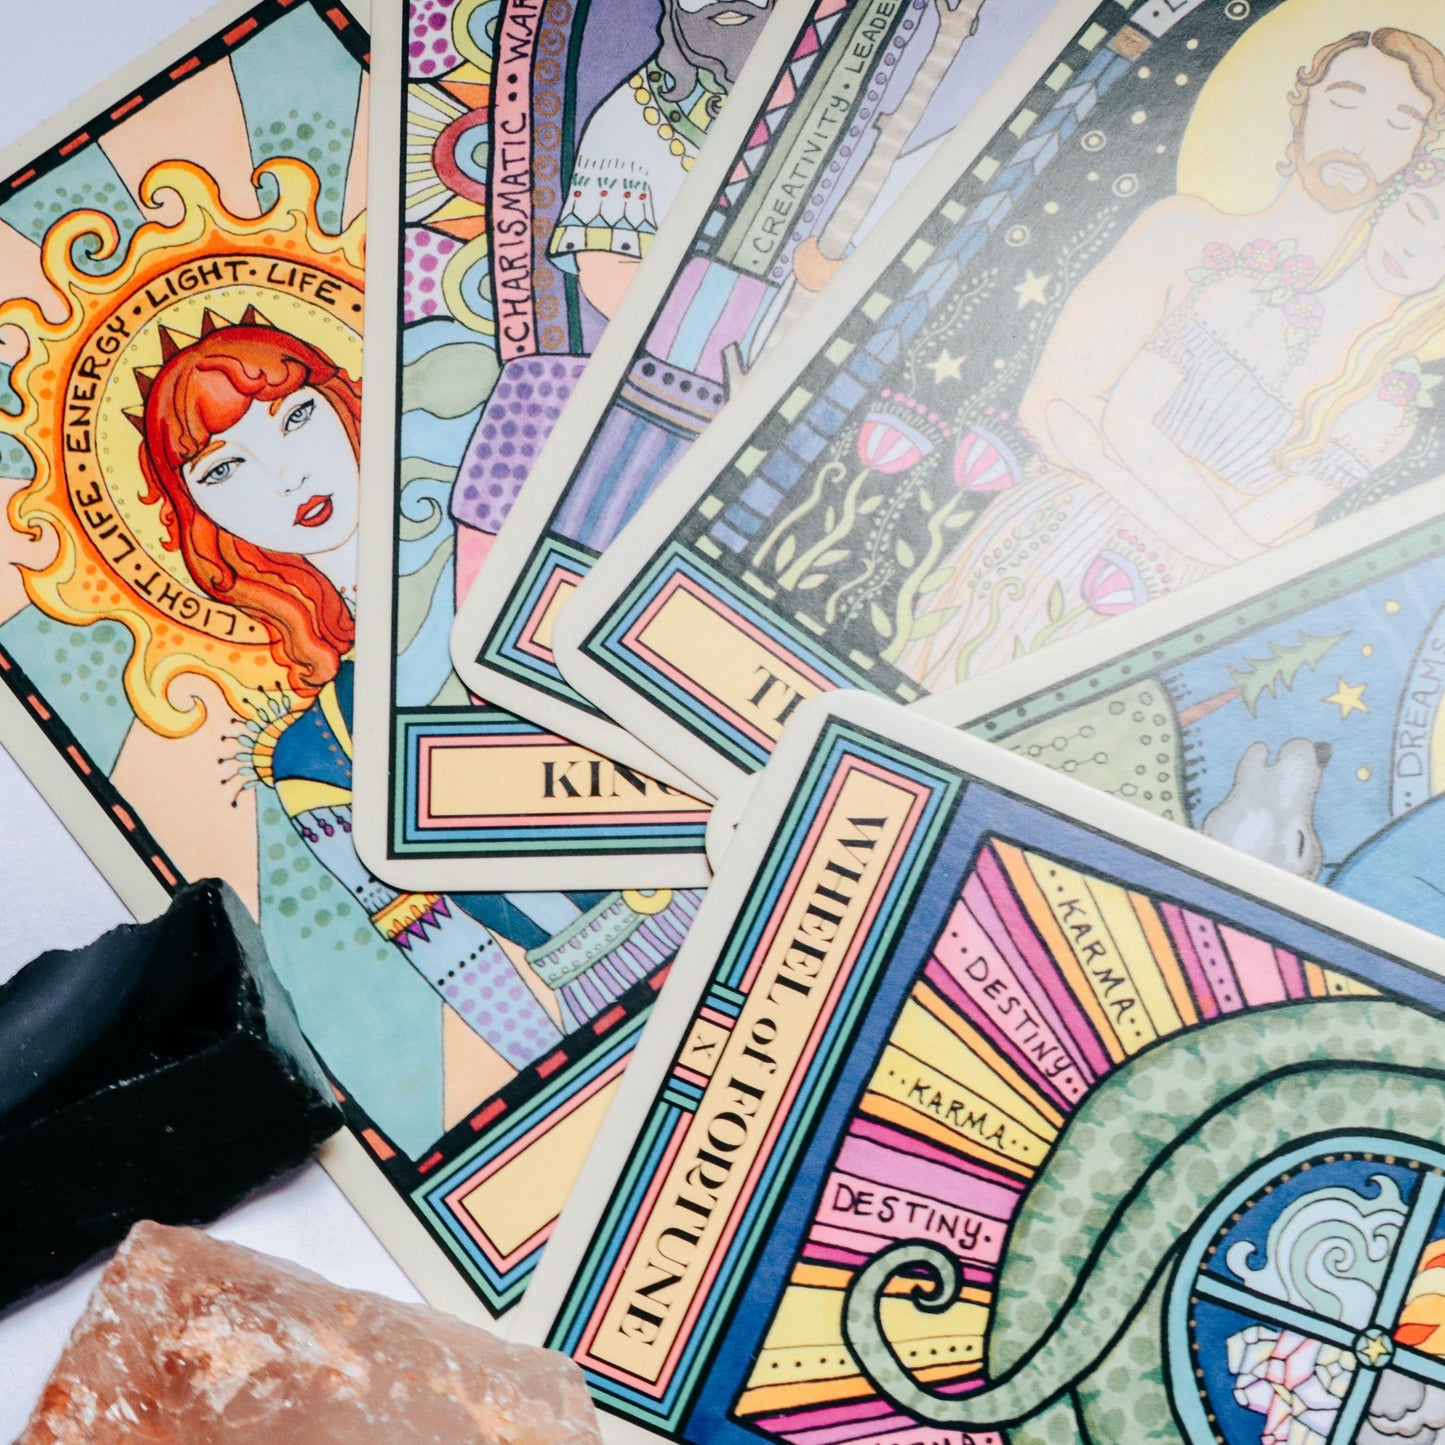 Psychic - Intuitive Readings